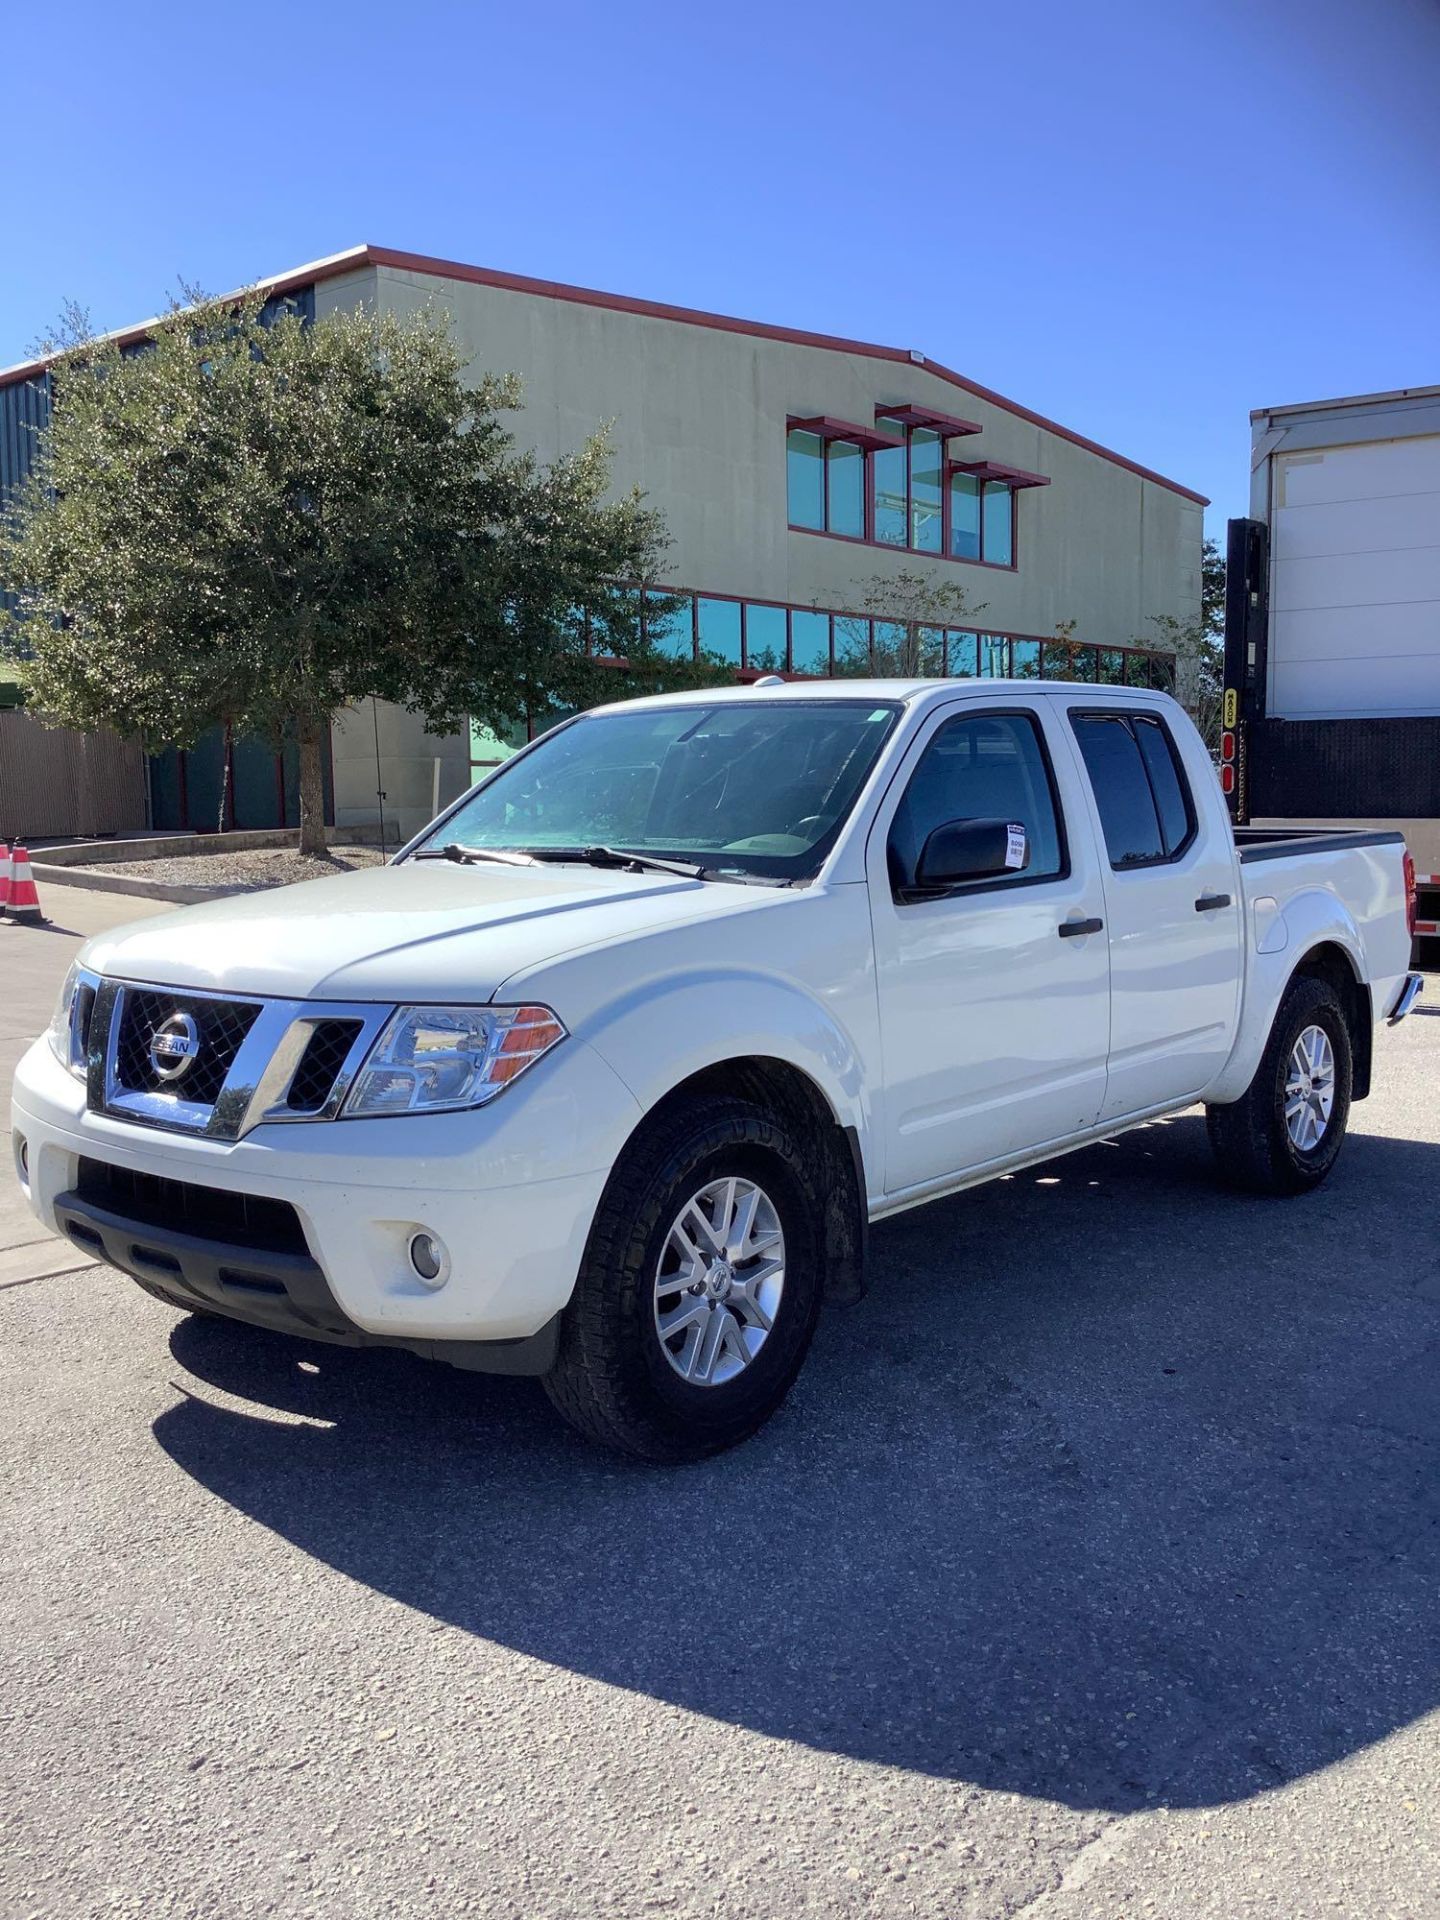 2017 NISSAN FRONTIER PICKUP TRUCK, GAS ENGINE, AUTOMATIC TRANSMISSION, CREW CAB, 4 DOOR, A/C , POWER - Image 13 of 24